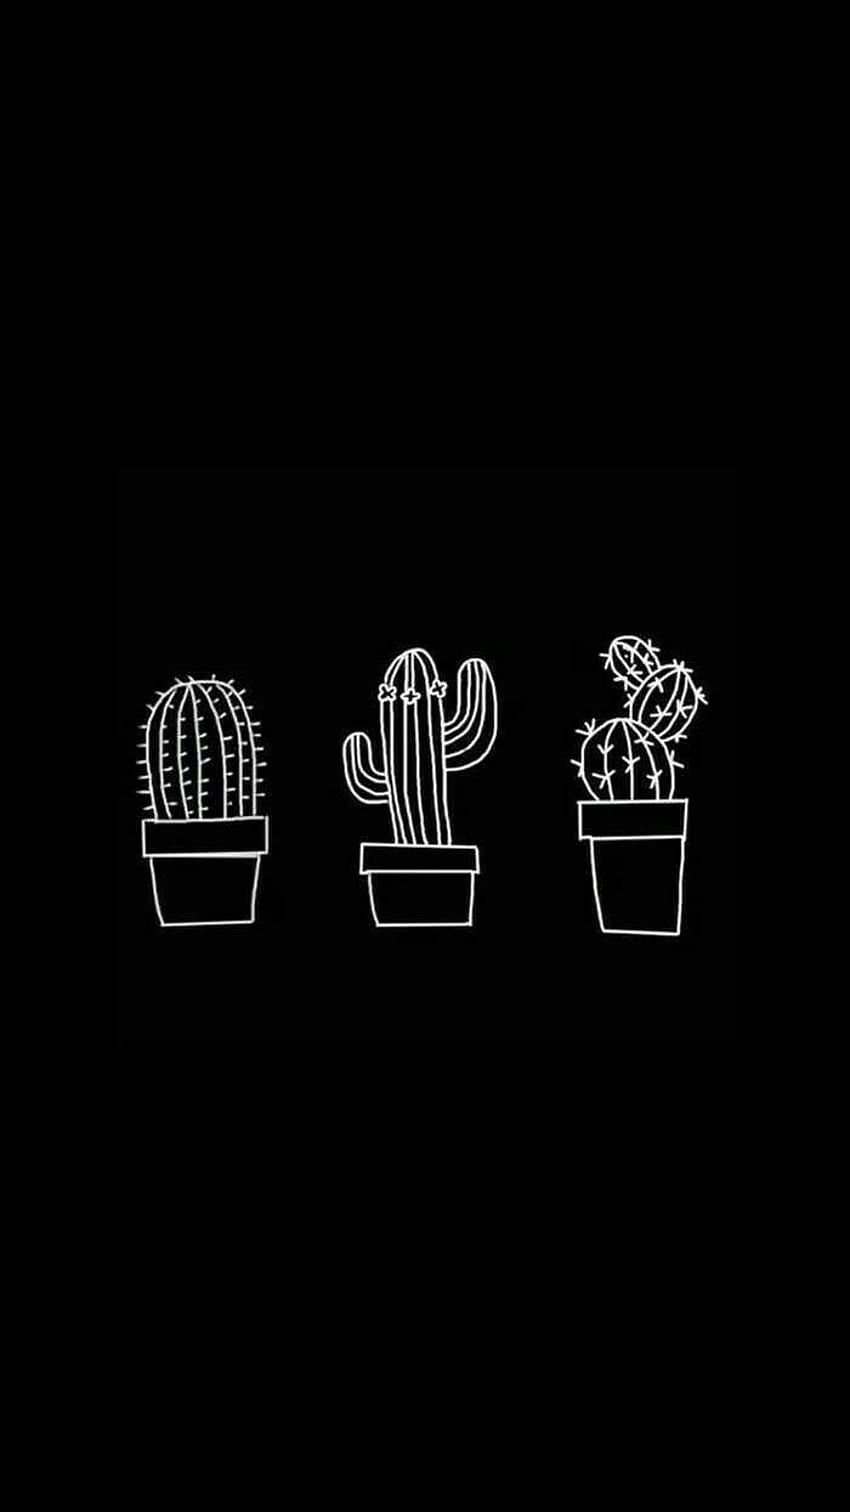 Three cacti on a black background - Cute white, black and white